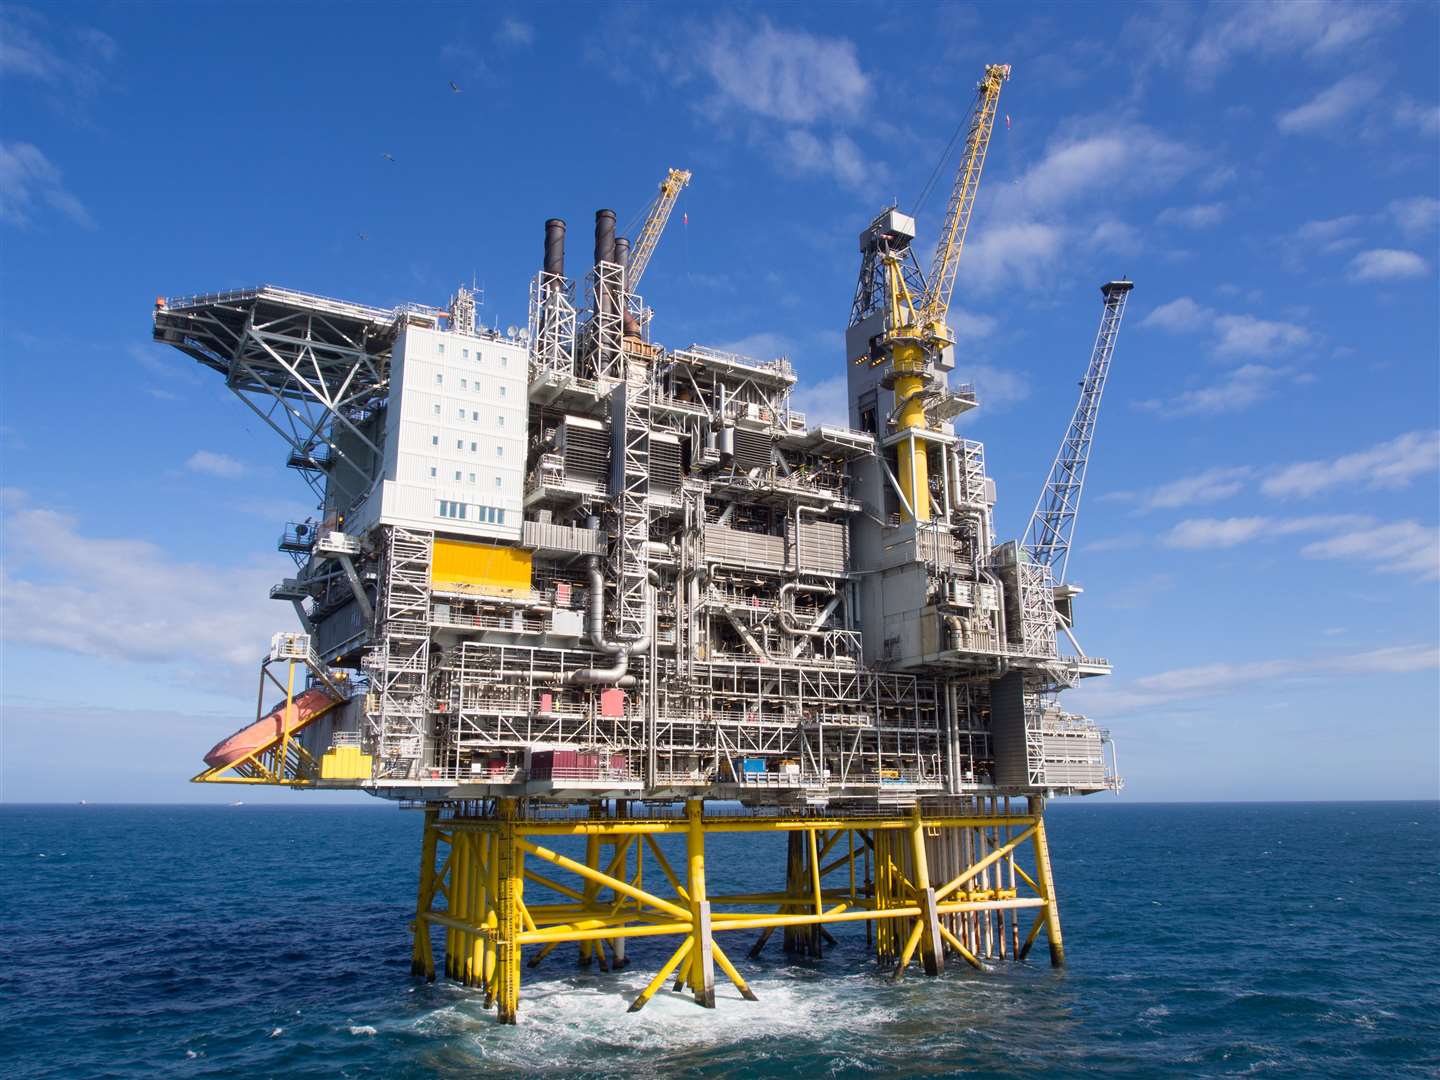 Offshore oil platform on the North Sea, in the Norwegian sector.